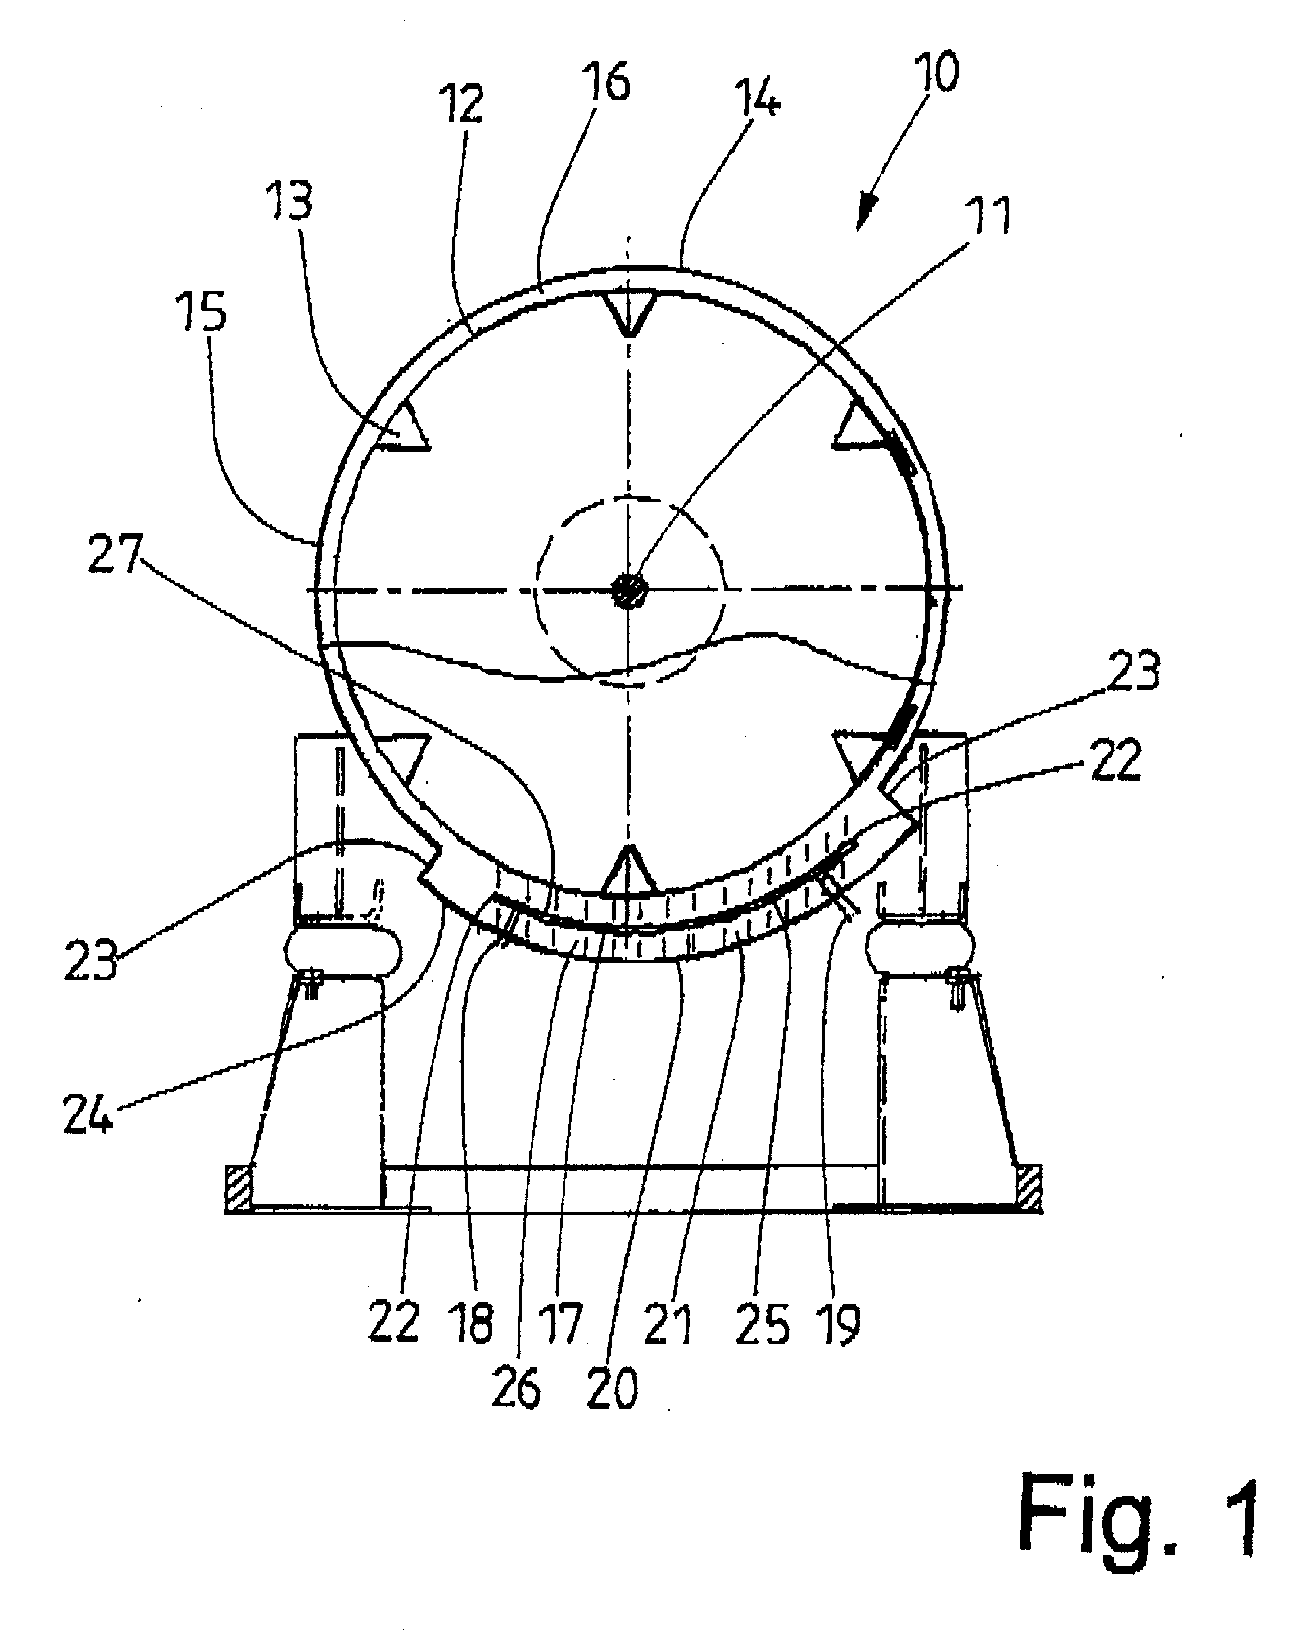 Method and apparatus for treating, preferably washing, spinning and/or drying, laundry